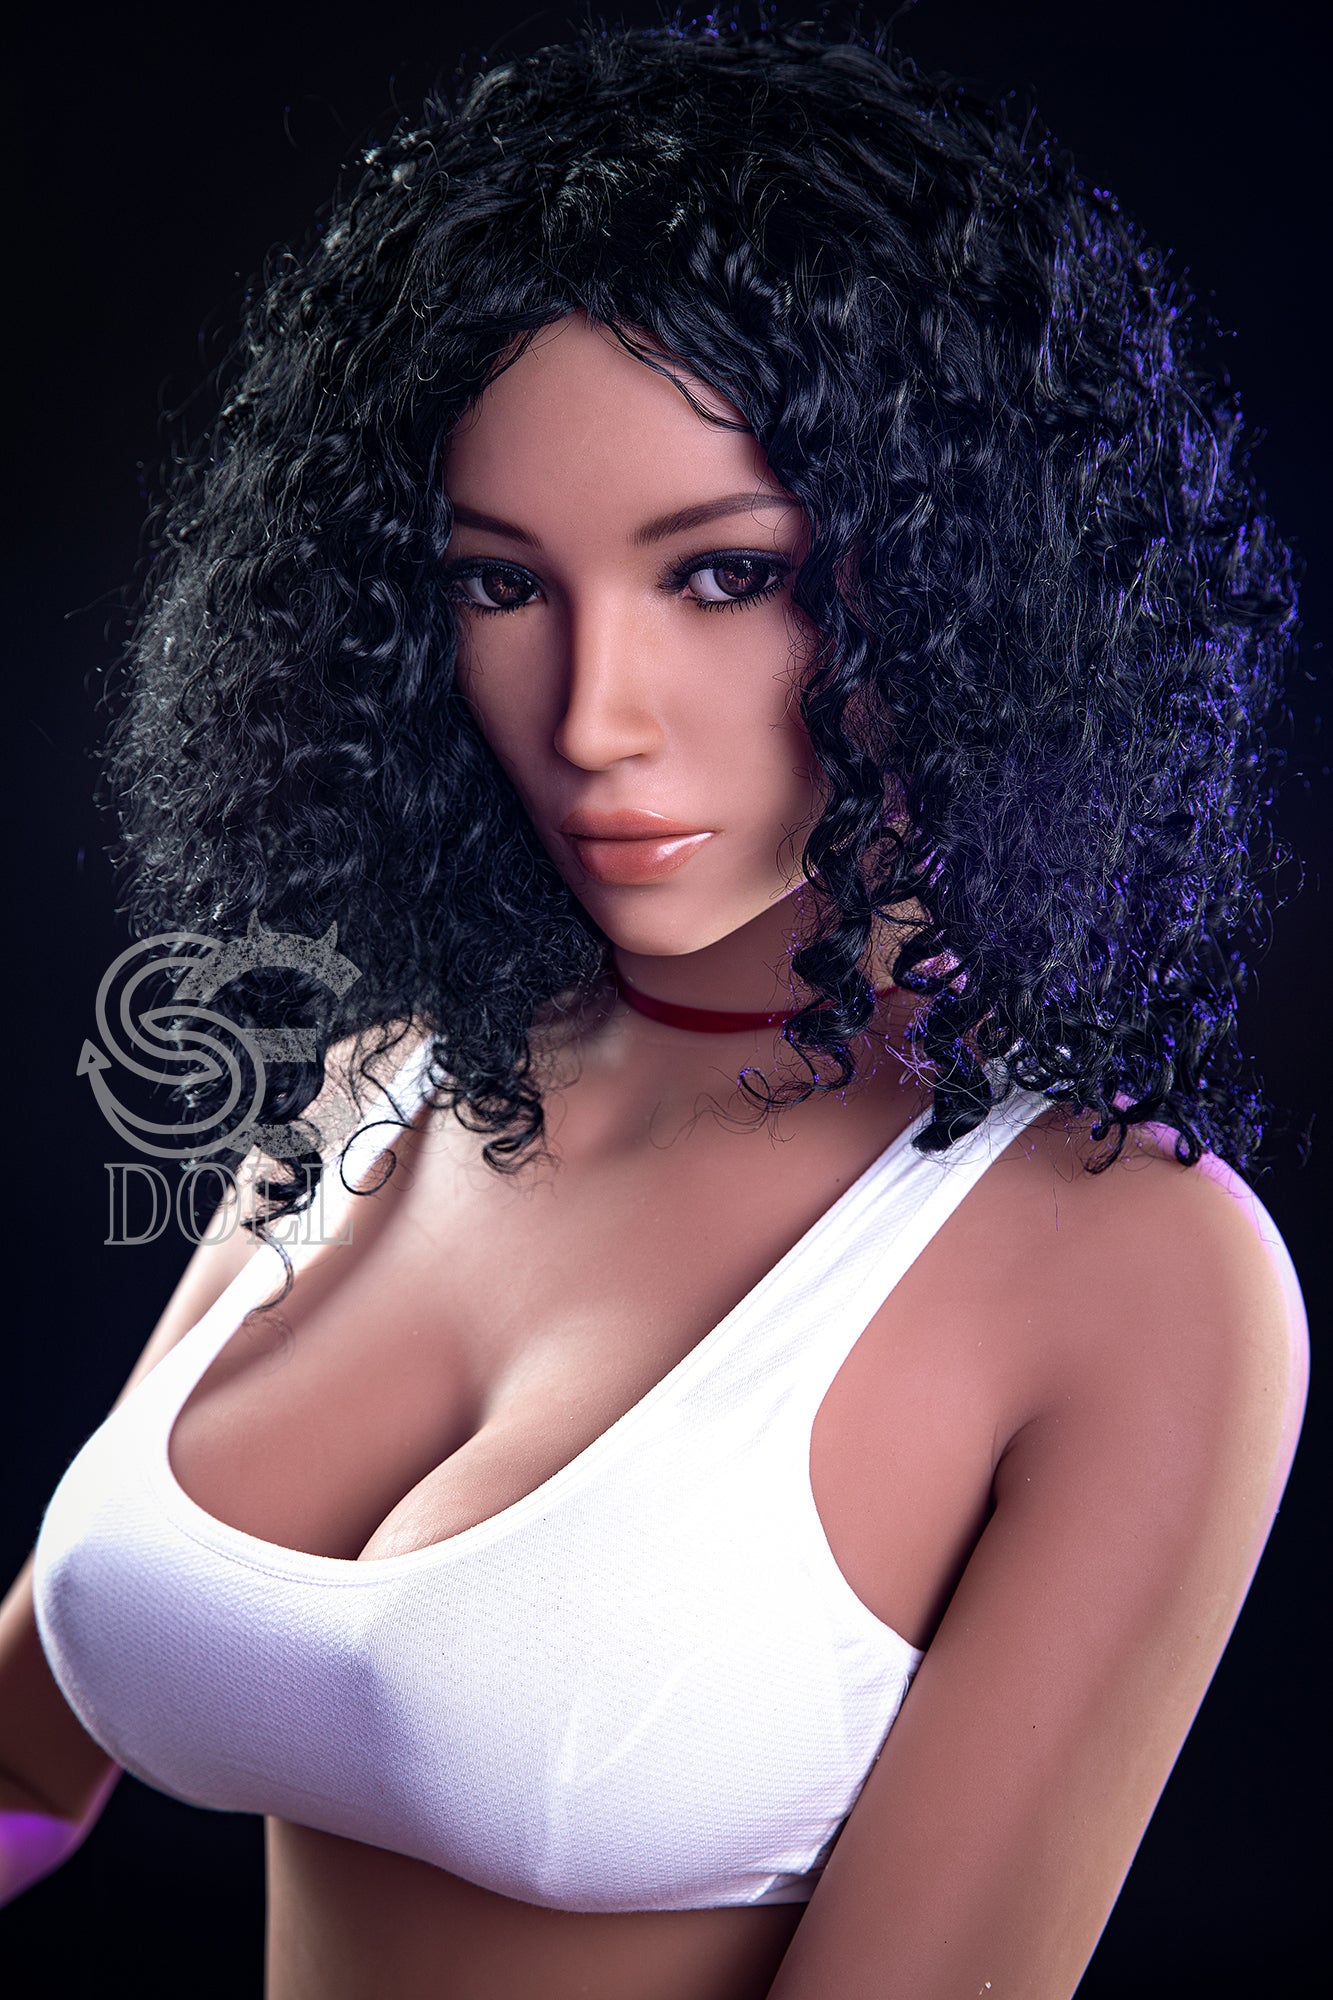 SEDOLL 159 cm H TPE - Taylor | Buy Sex Dolls at DOLLS ACTUALLY